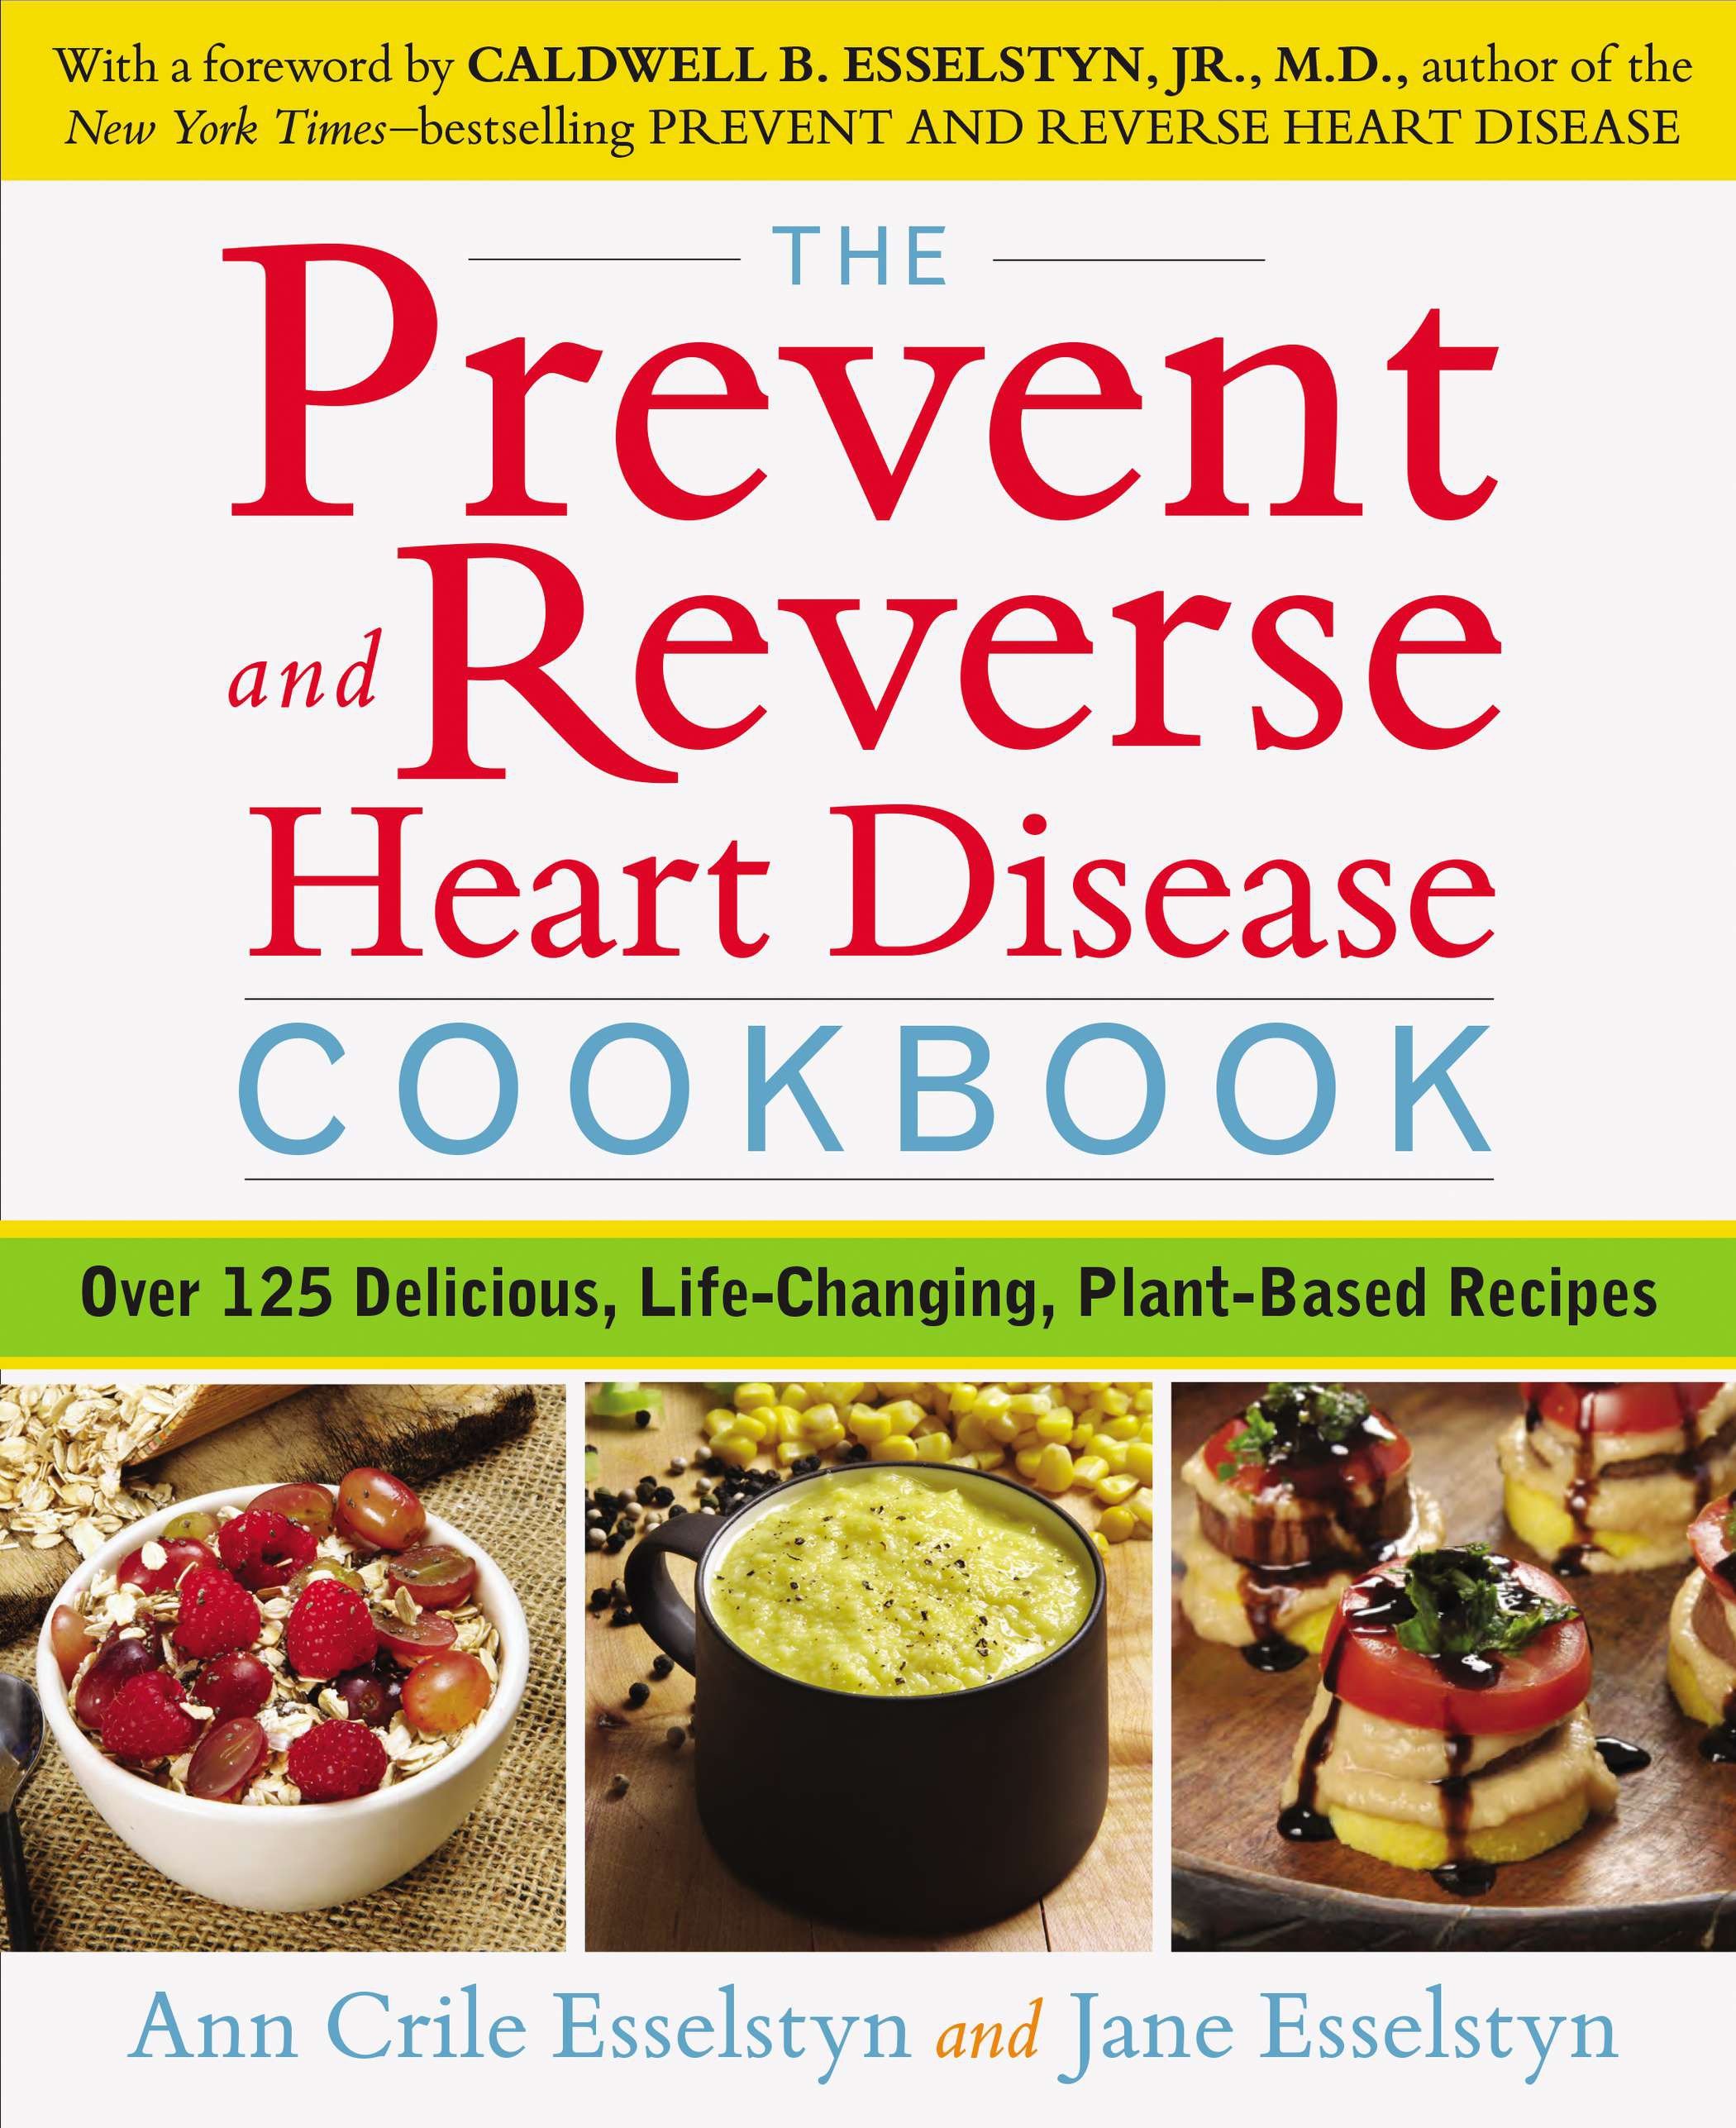 The Prevent and Reverse Heart Disease Cookbook: Over 125 Delicious, Life-Changing, Plant-Based Recipes - image 1 of 1